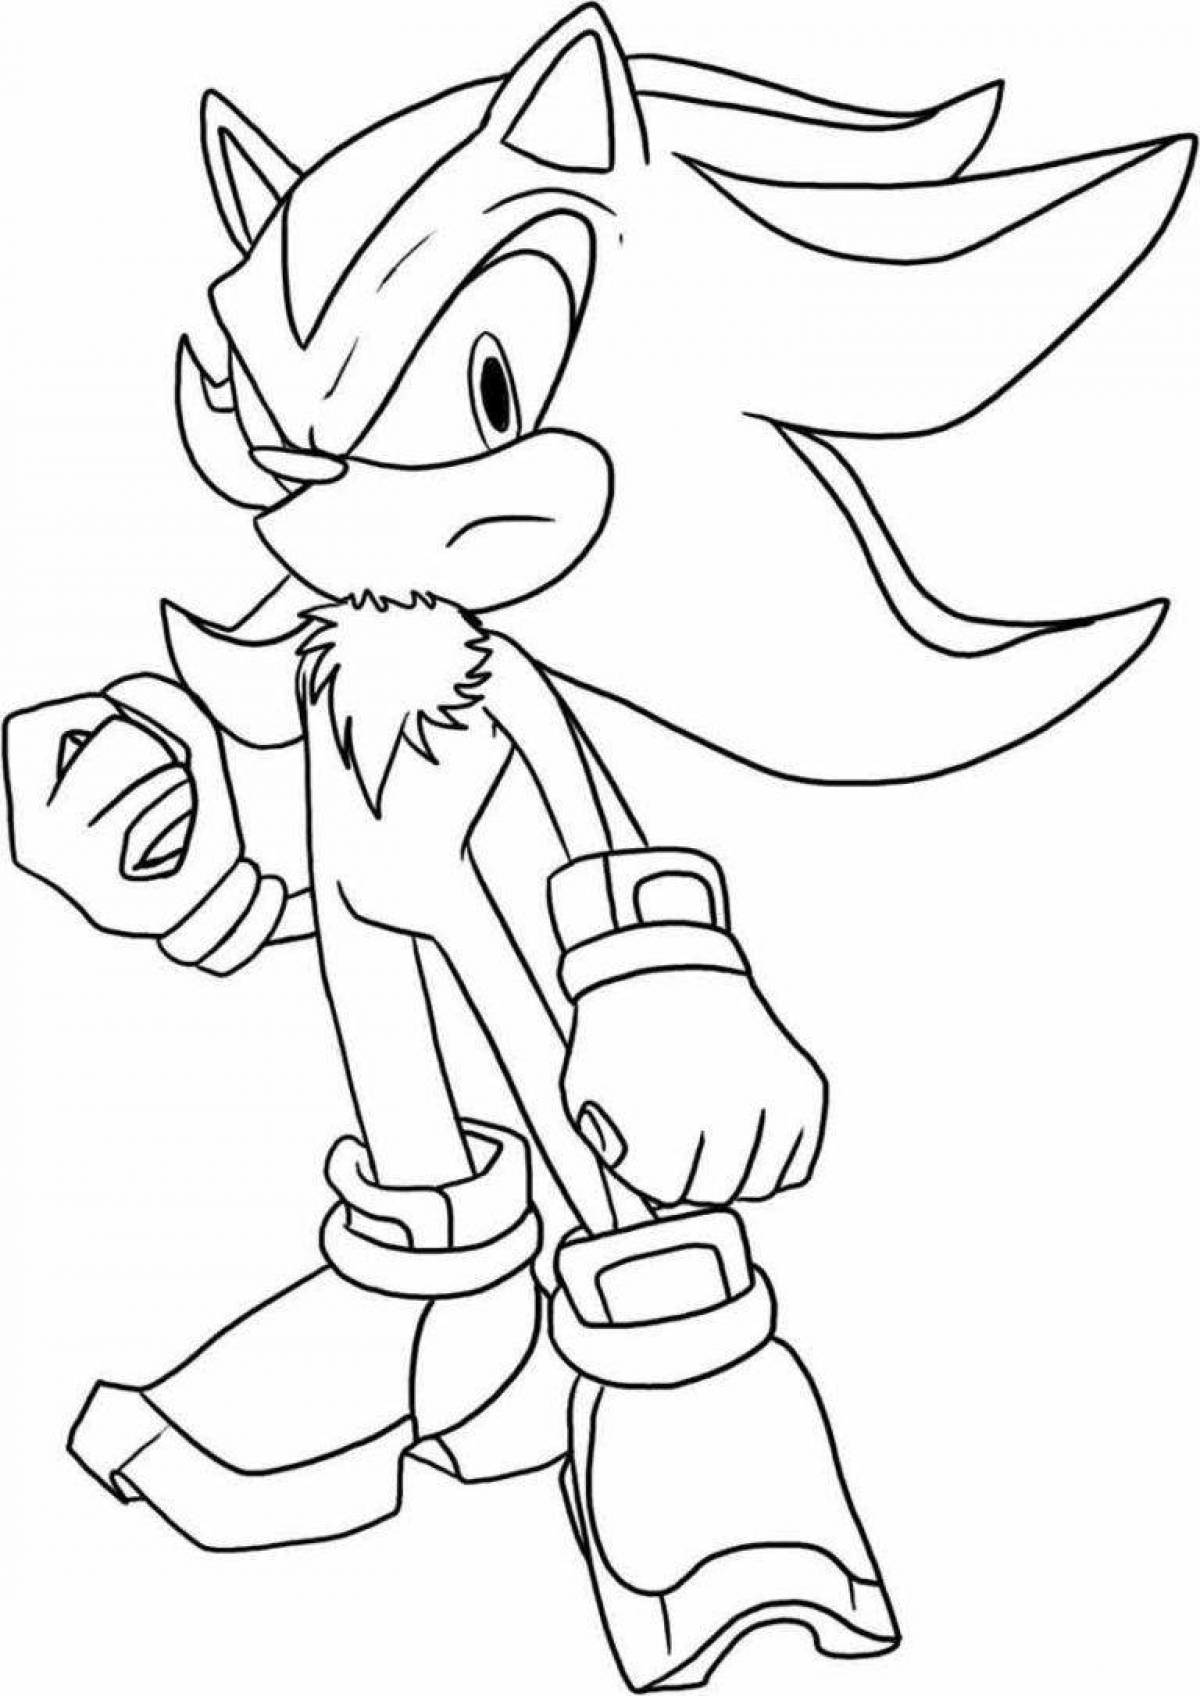 Flawless Metal Shadow Coloring Page